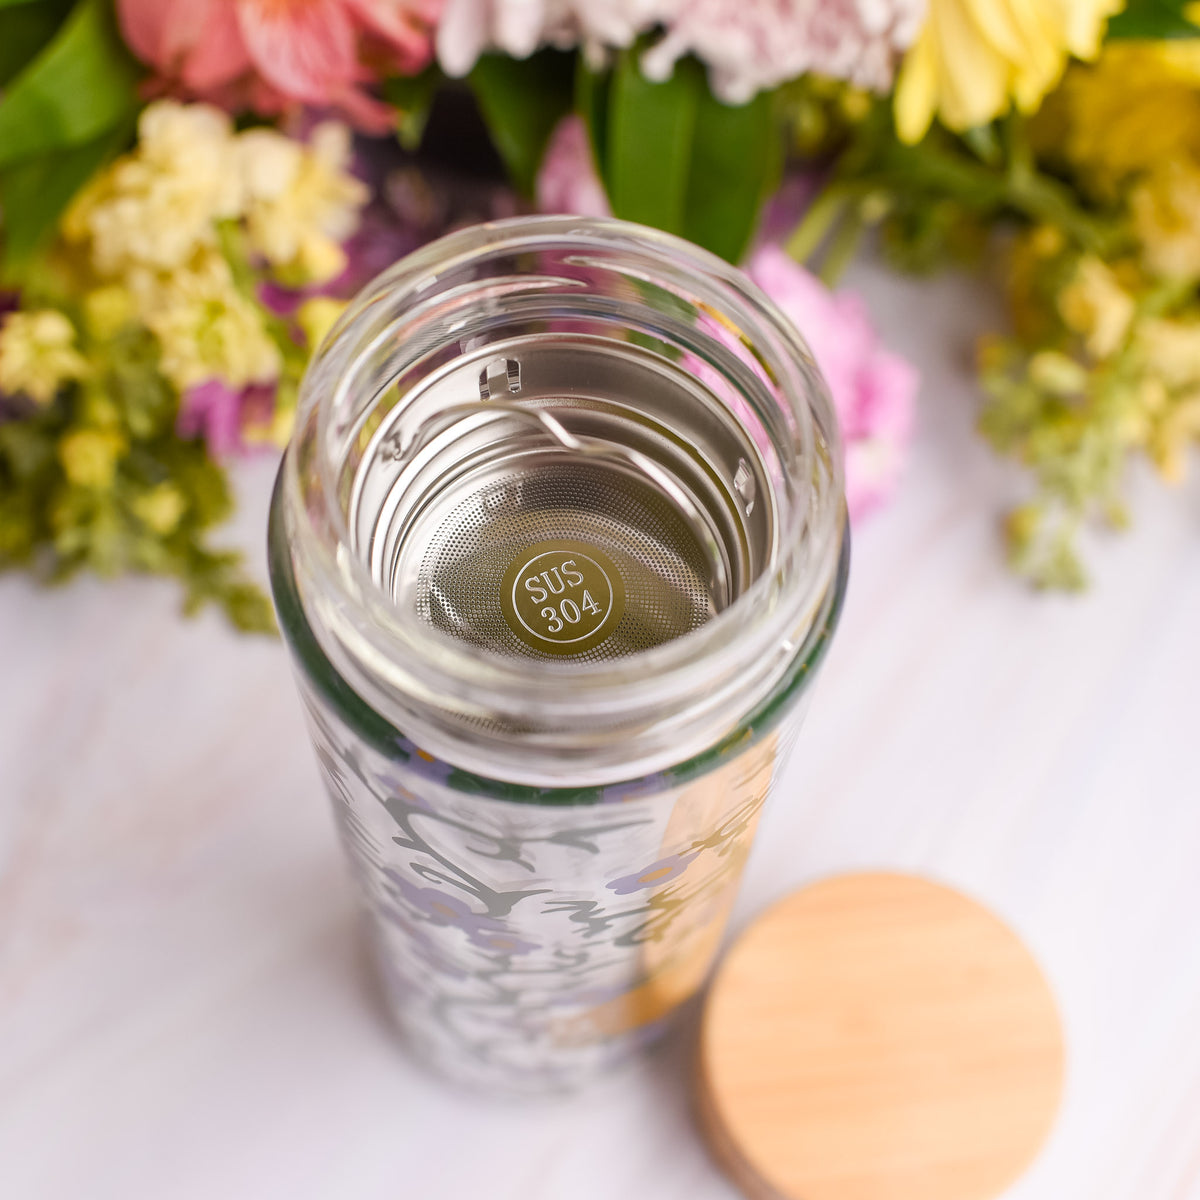 The Secret Garden Glass Water Bottle with bamboo lid and a tea or fruit infuser in the top